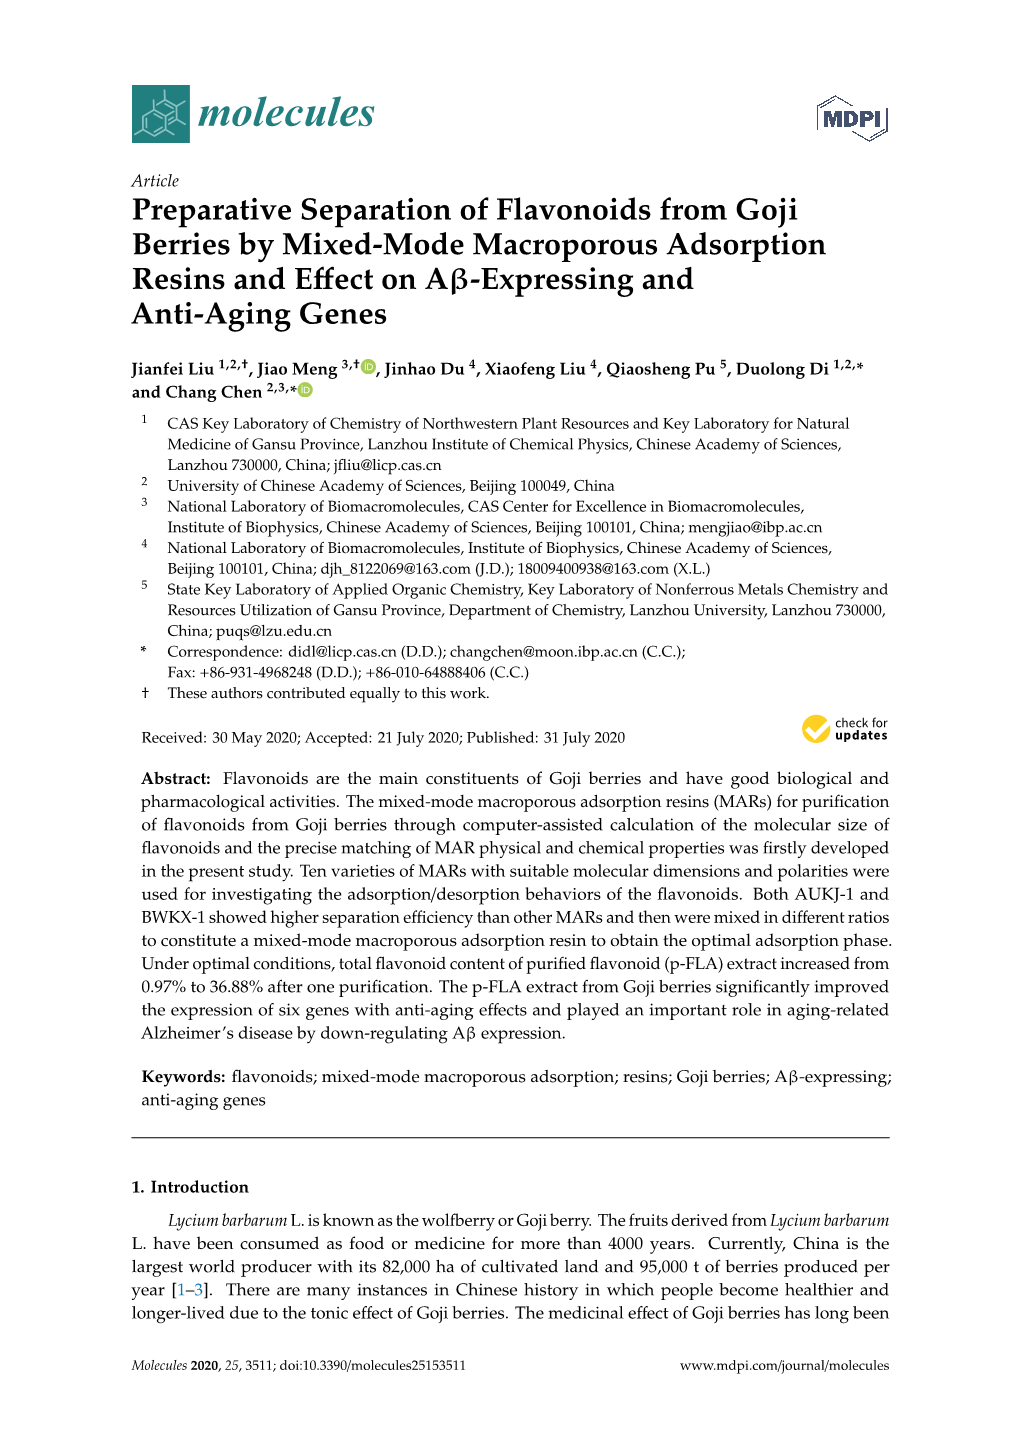 Preparative Separation of Flavonoids from Goji Berries by Mixed-Mode Macroporous Adsorption Resins and Eﬀect on Aβ-Expressing and Anti-Aging Genes